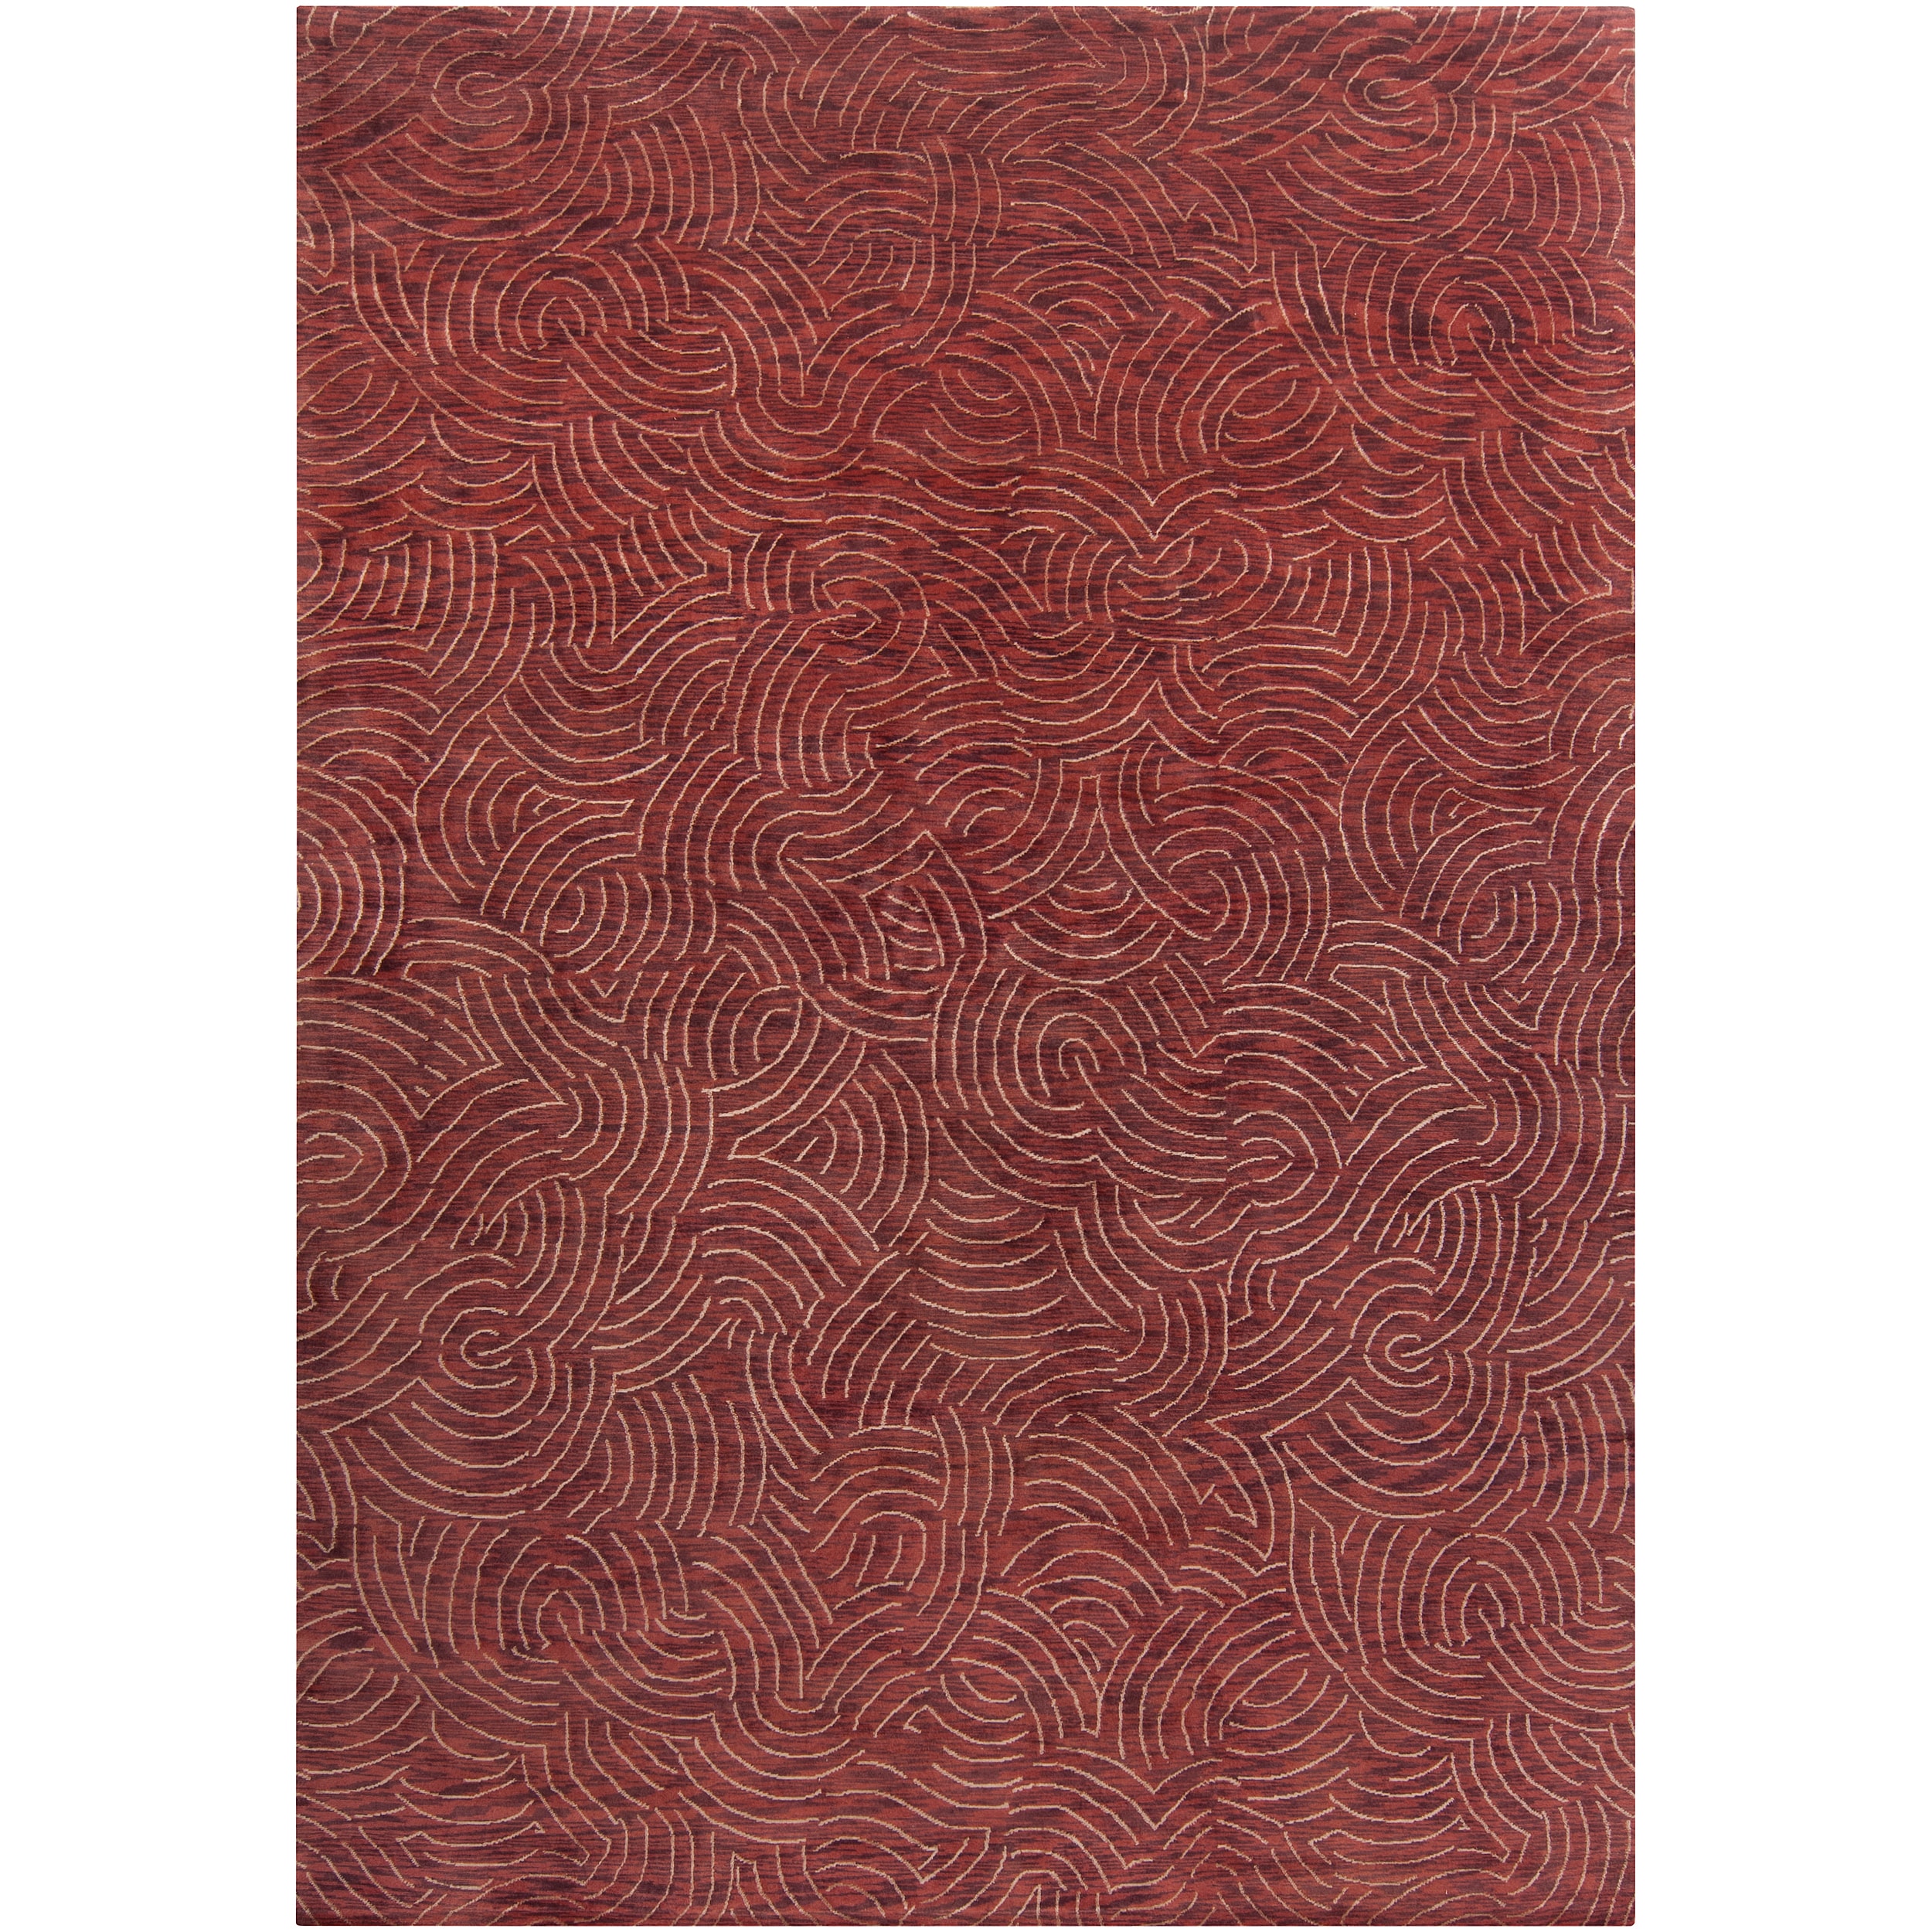 Julie Cohn Hand knotted Multicolored Vilas Contemporary Abstract design Wool Rug (5 X 8)